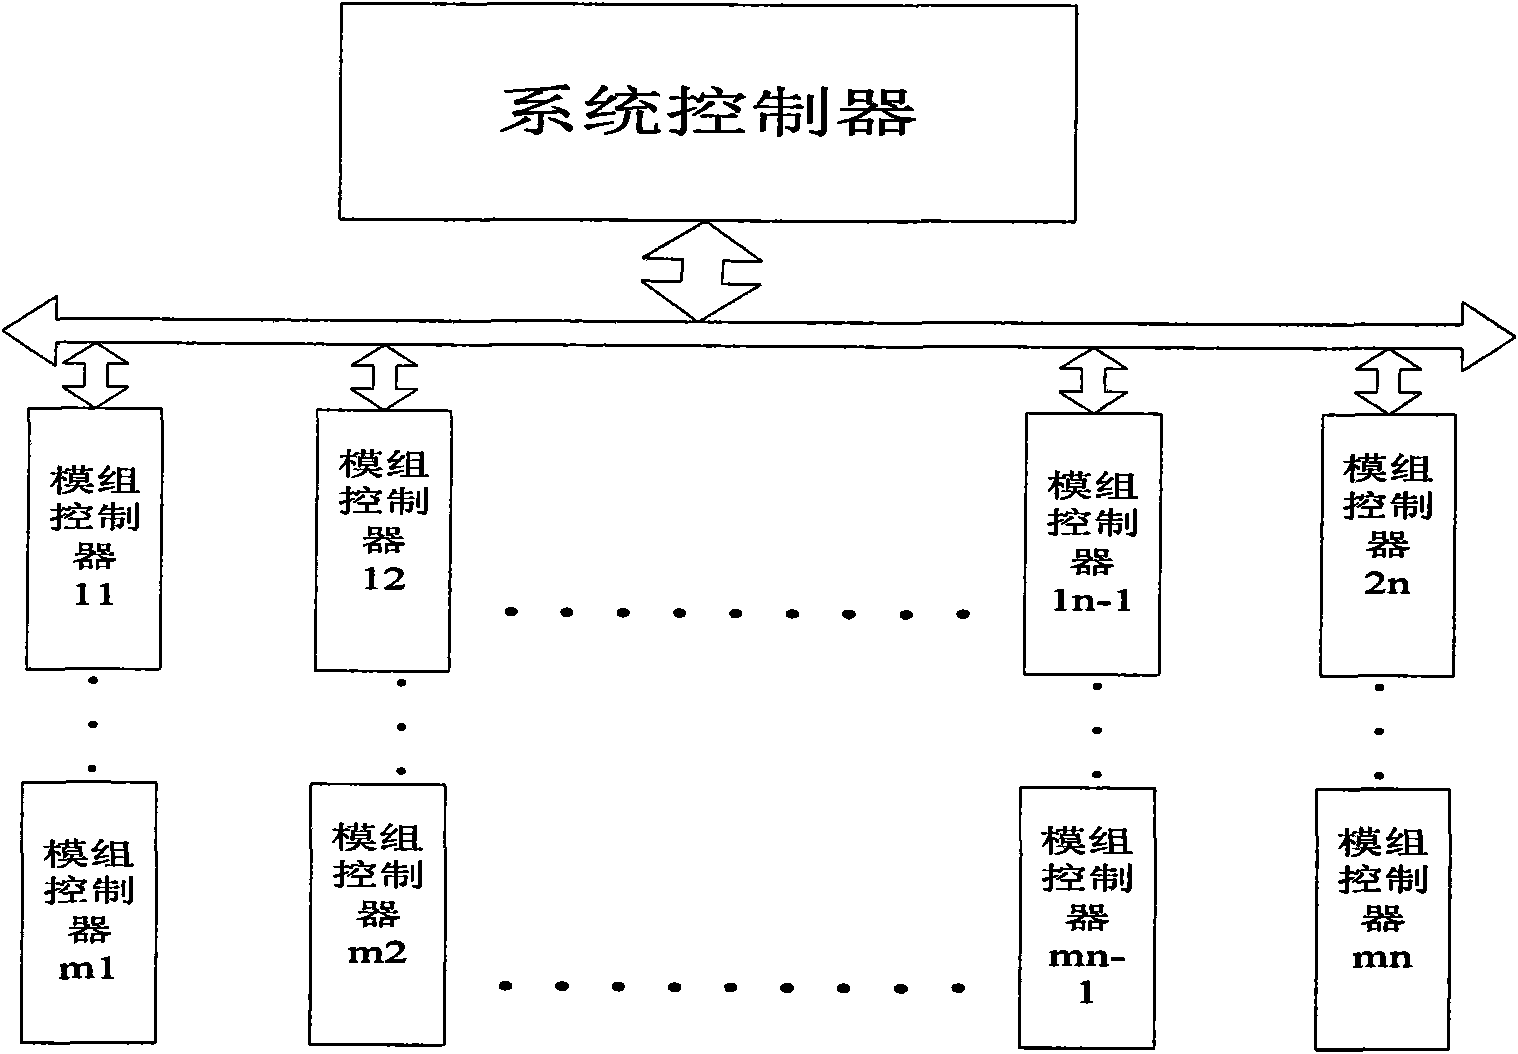 Ethernet type LED display screen control system